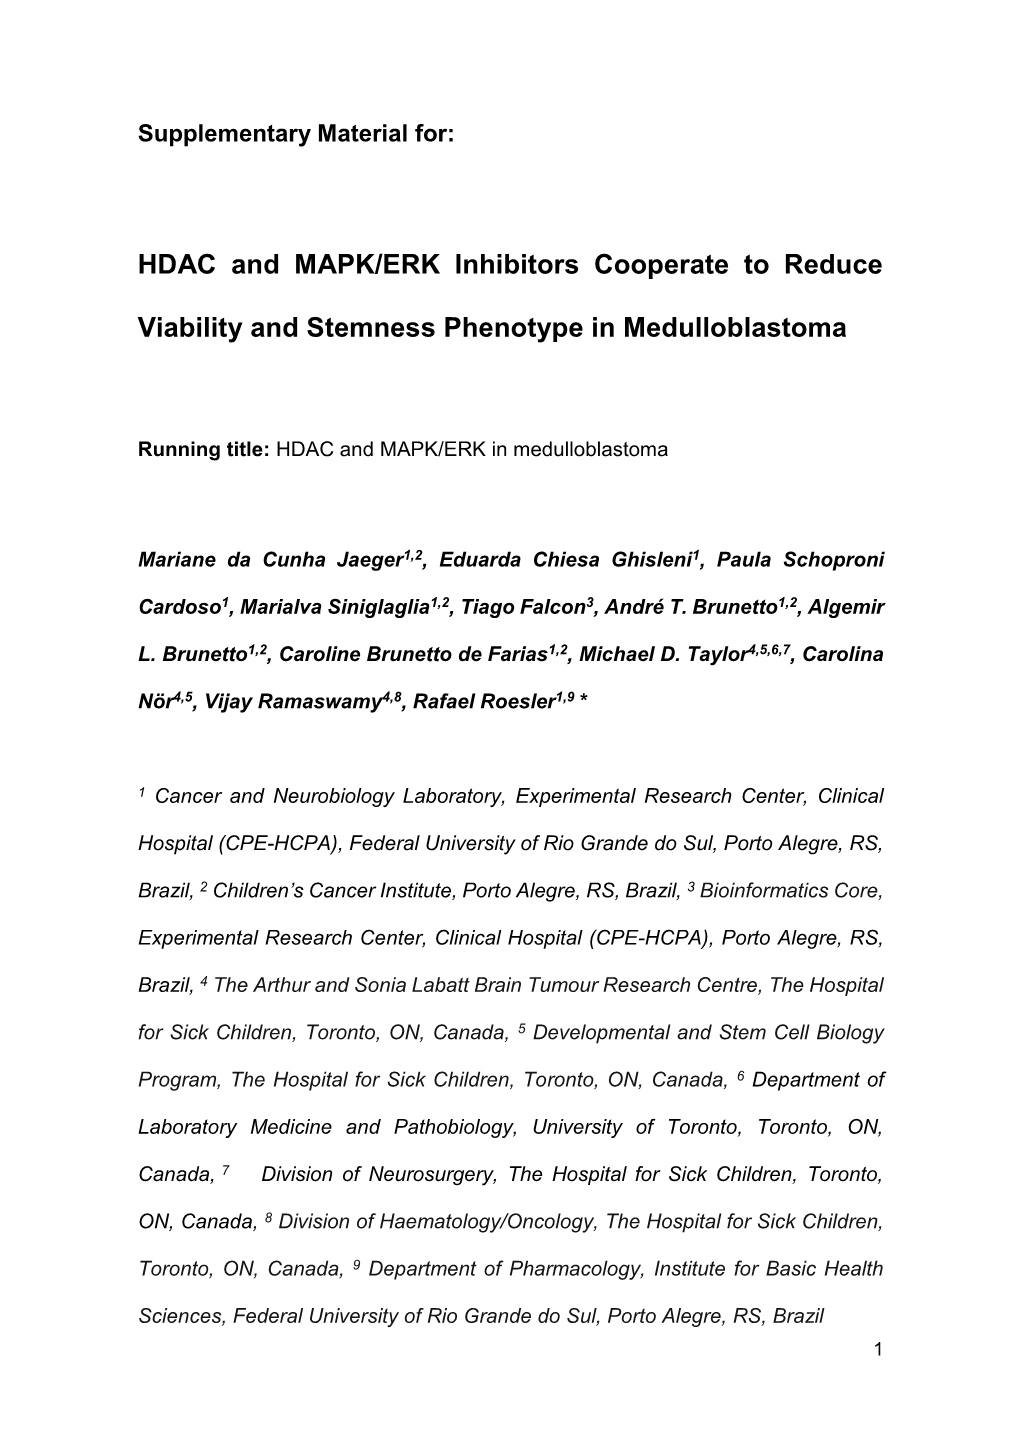 HDAC and MAPK/ERK Inhibitors Cooperate to Reduce Viability And